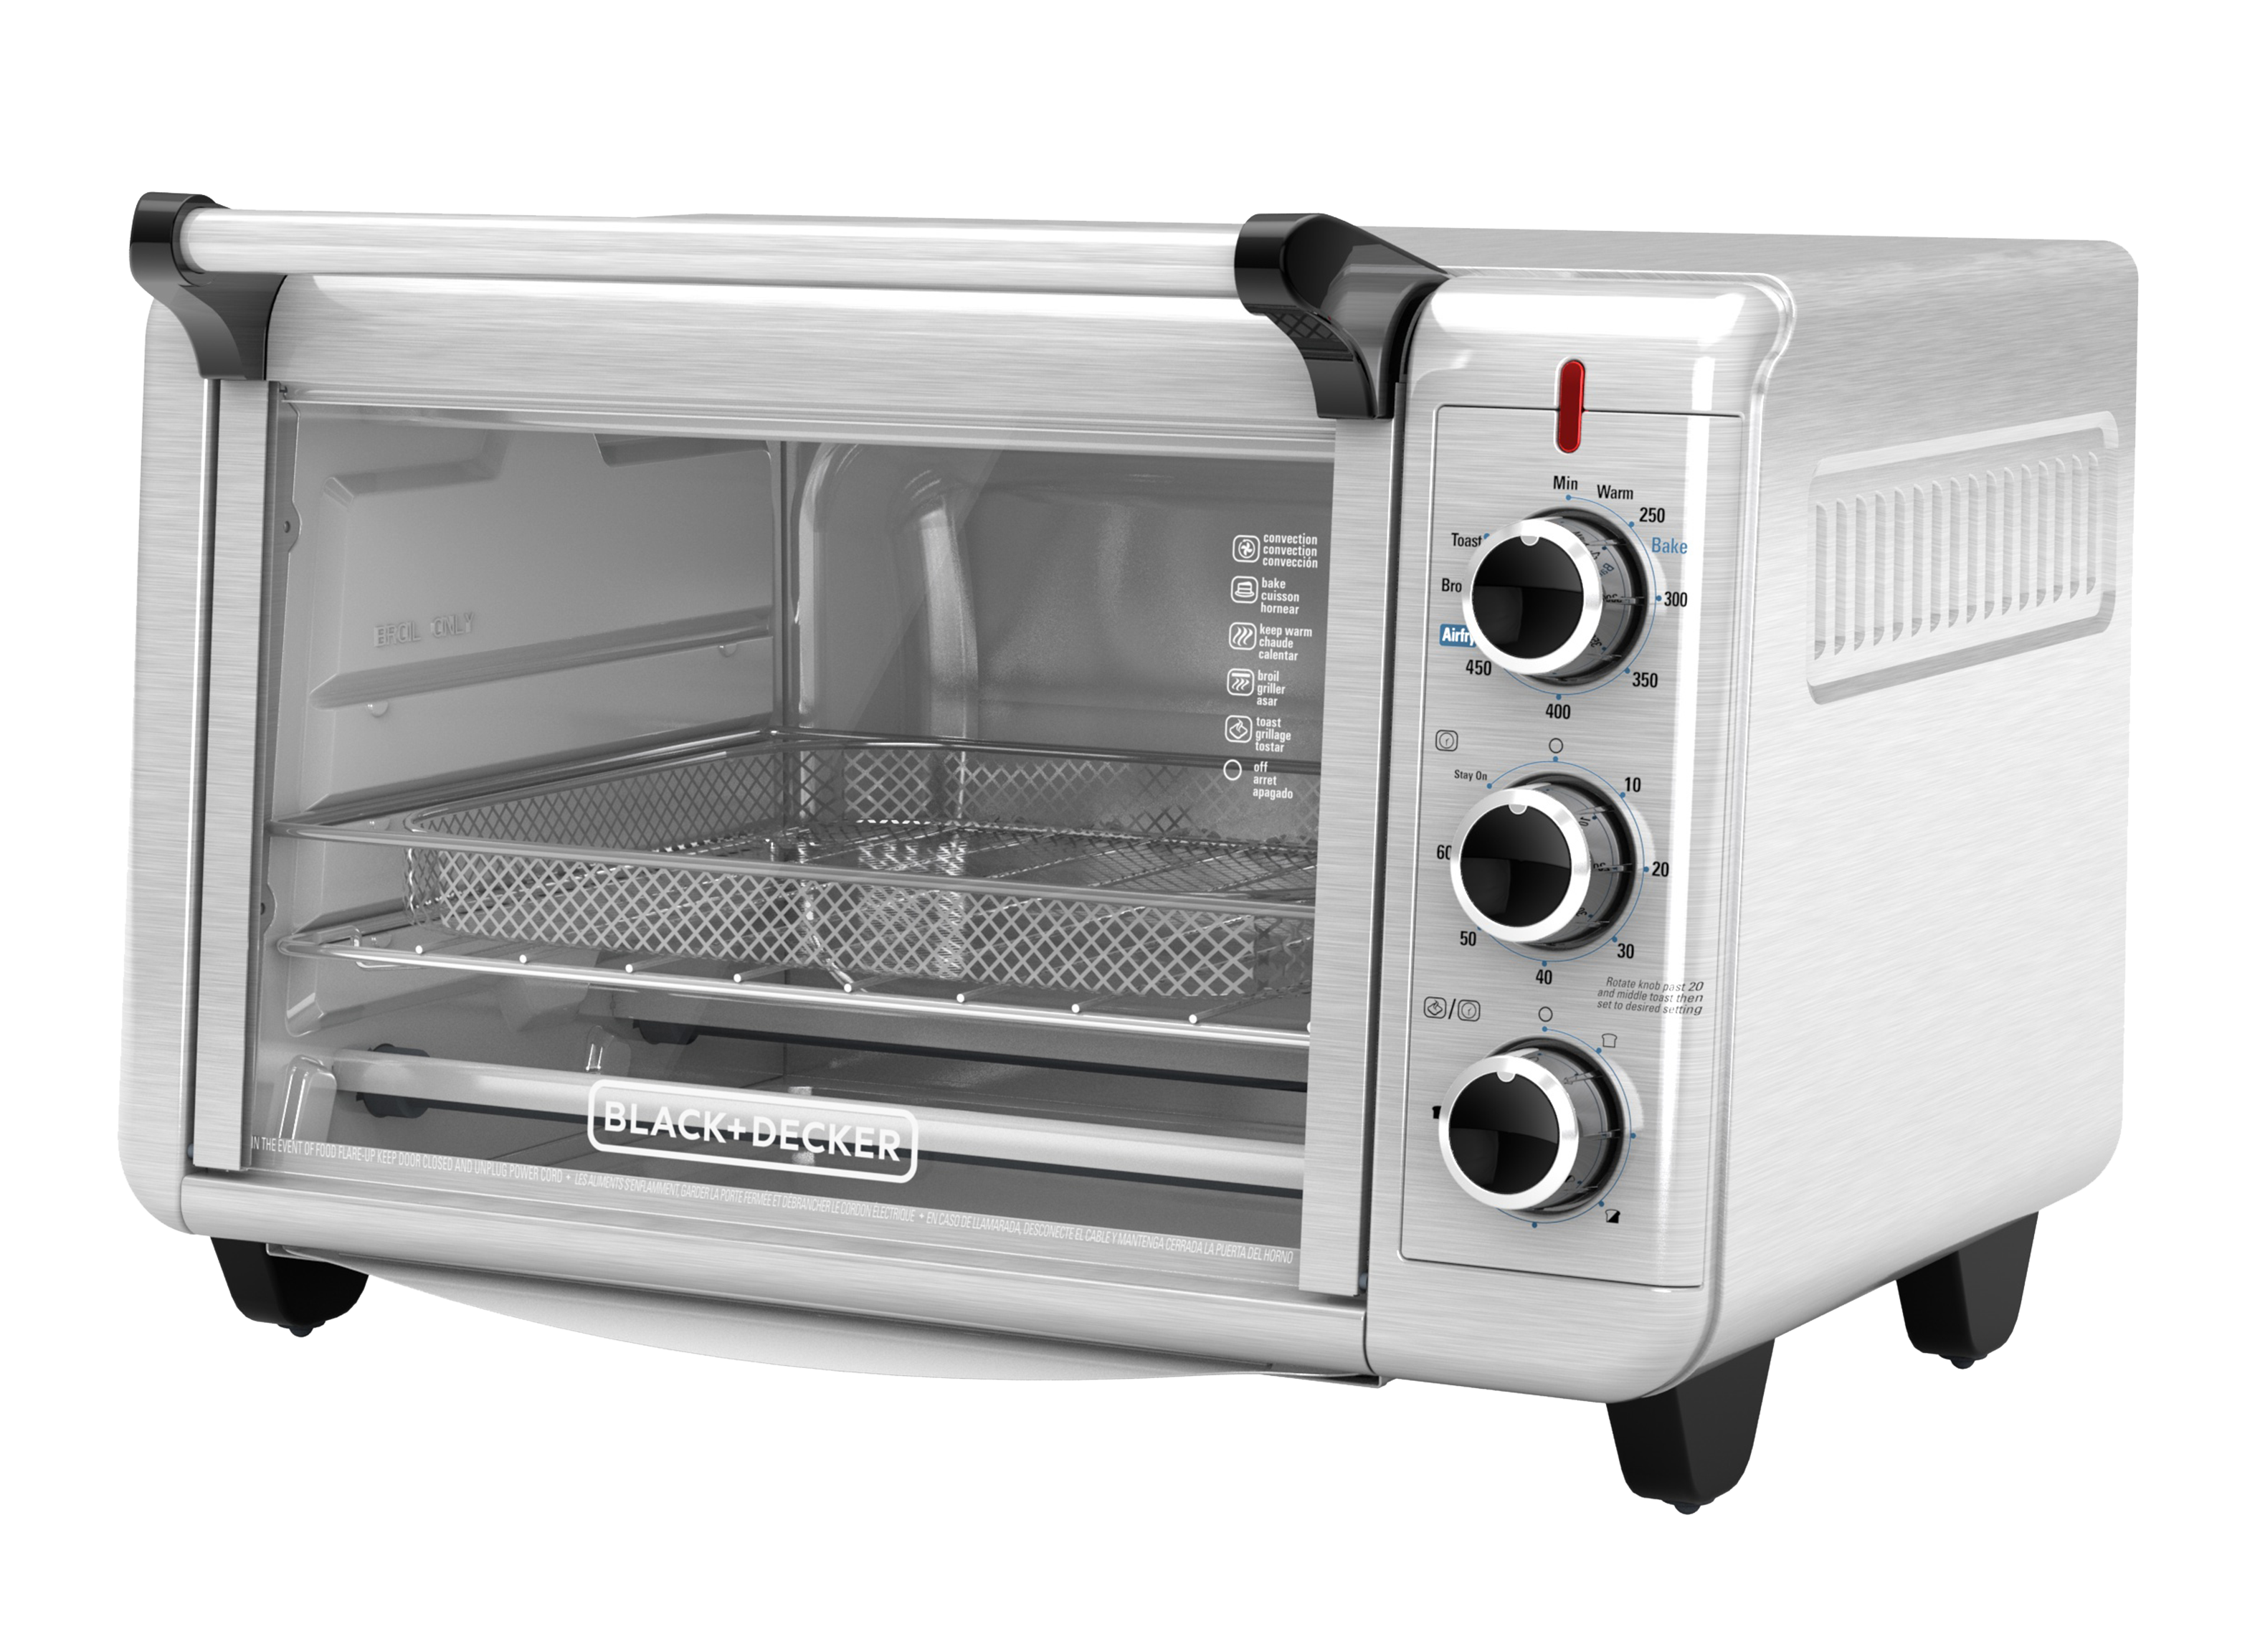 https://crdms.images.consumerreports.org/prod/products/cr/models/398536-toaster-ovens-black-decker-crisp-n-bake-air-fry-toaster-oven-to3215ss-10005052.png